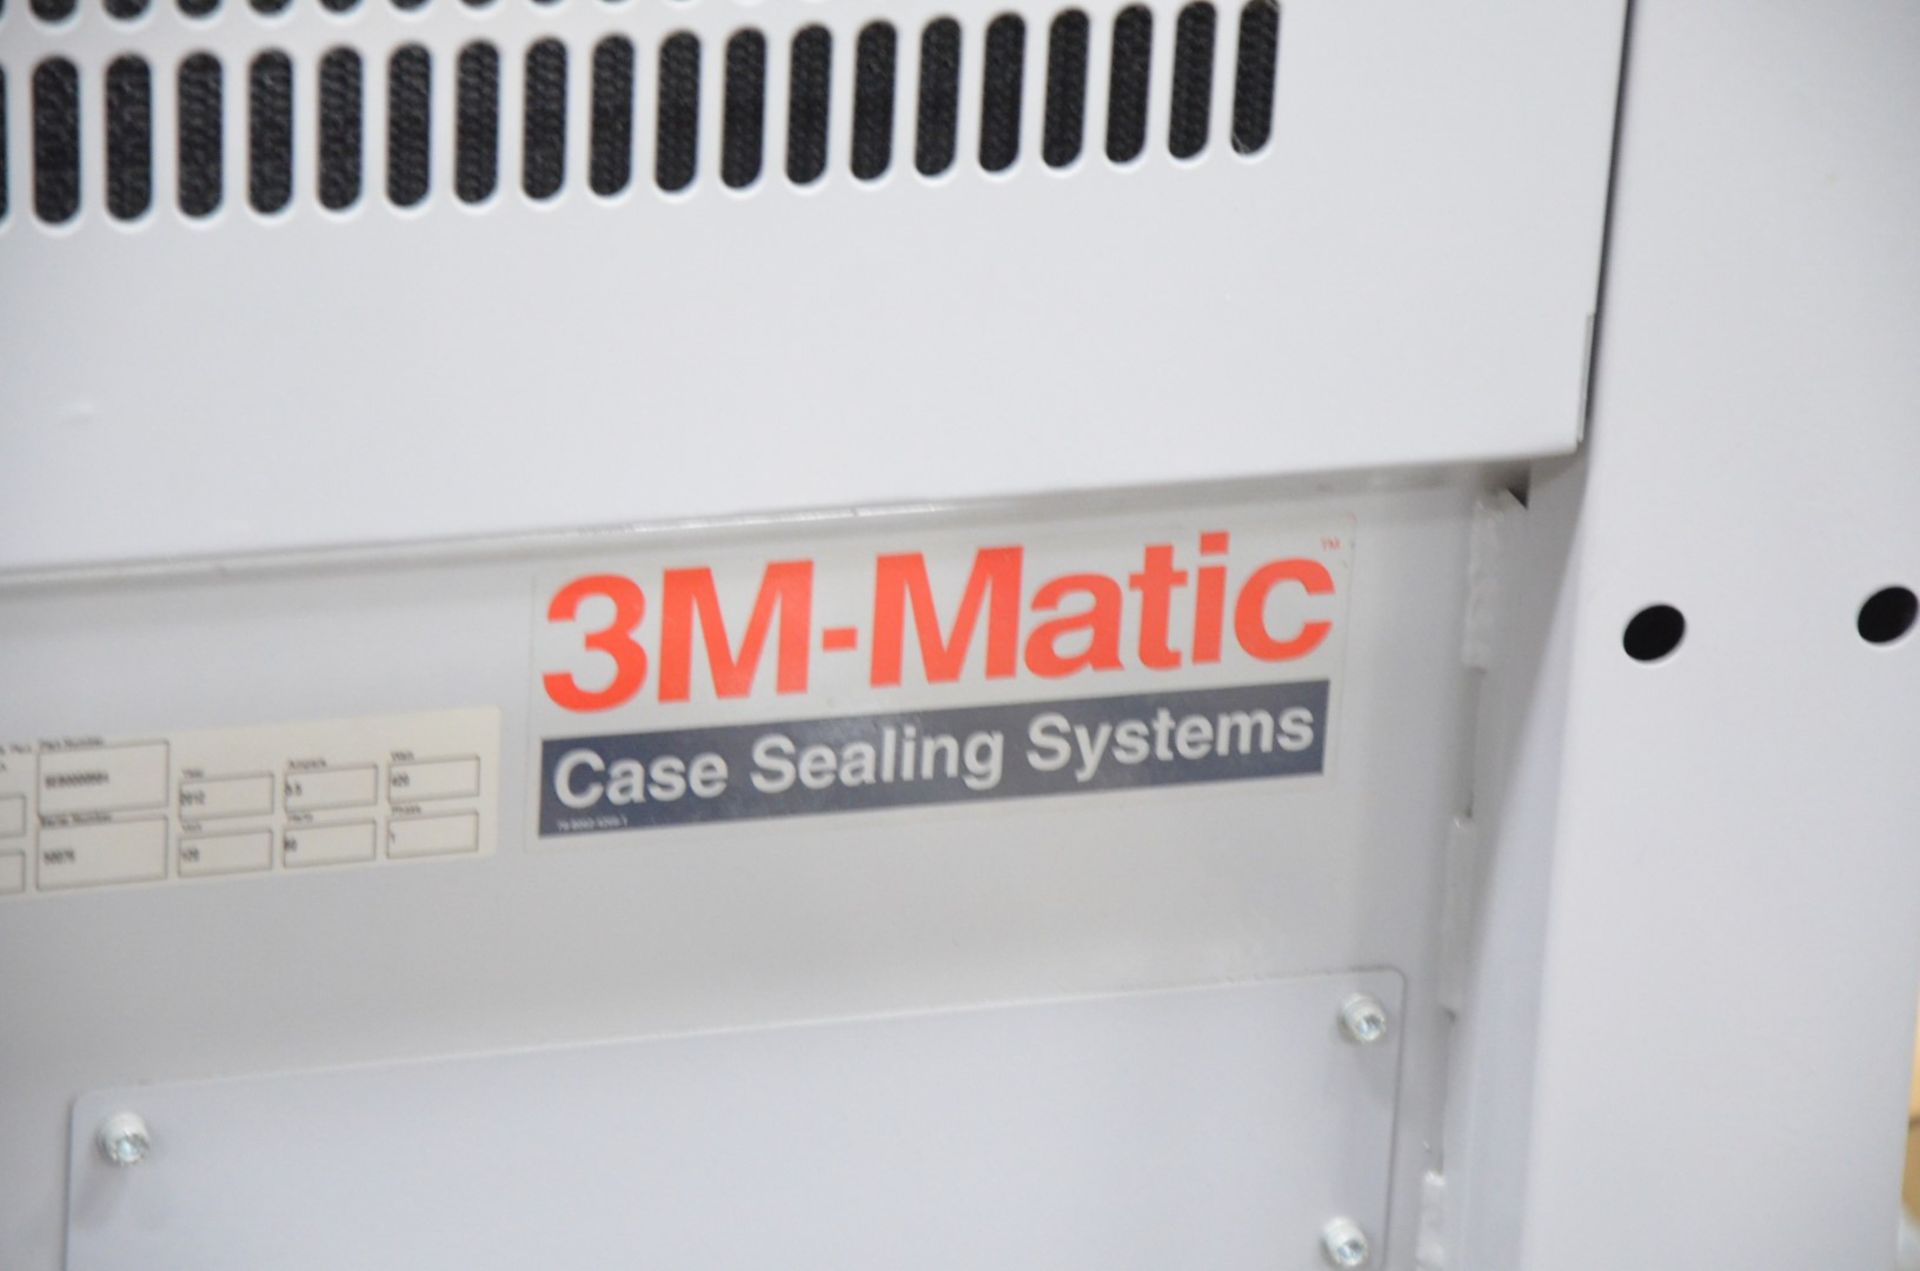 3M (2012) 3M-MATIC MODEL A80F TYPE 11000 AUTOMATIC CASE SEALER WITH FULL SAFETY ENCLOSURE, 3M - Image 5 of 6